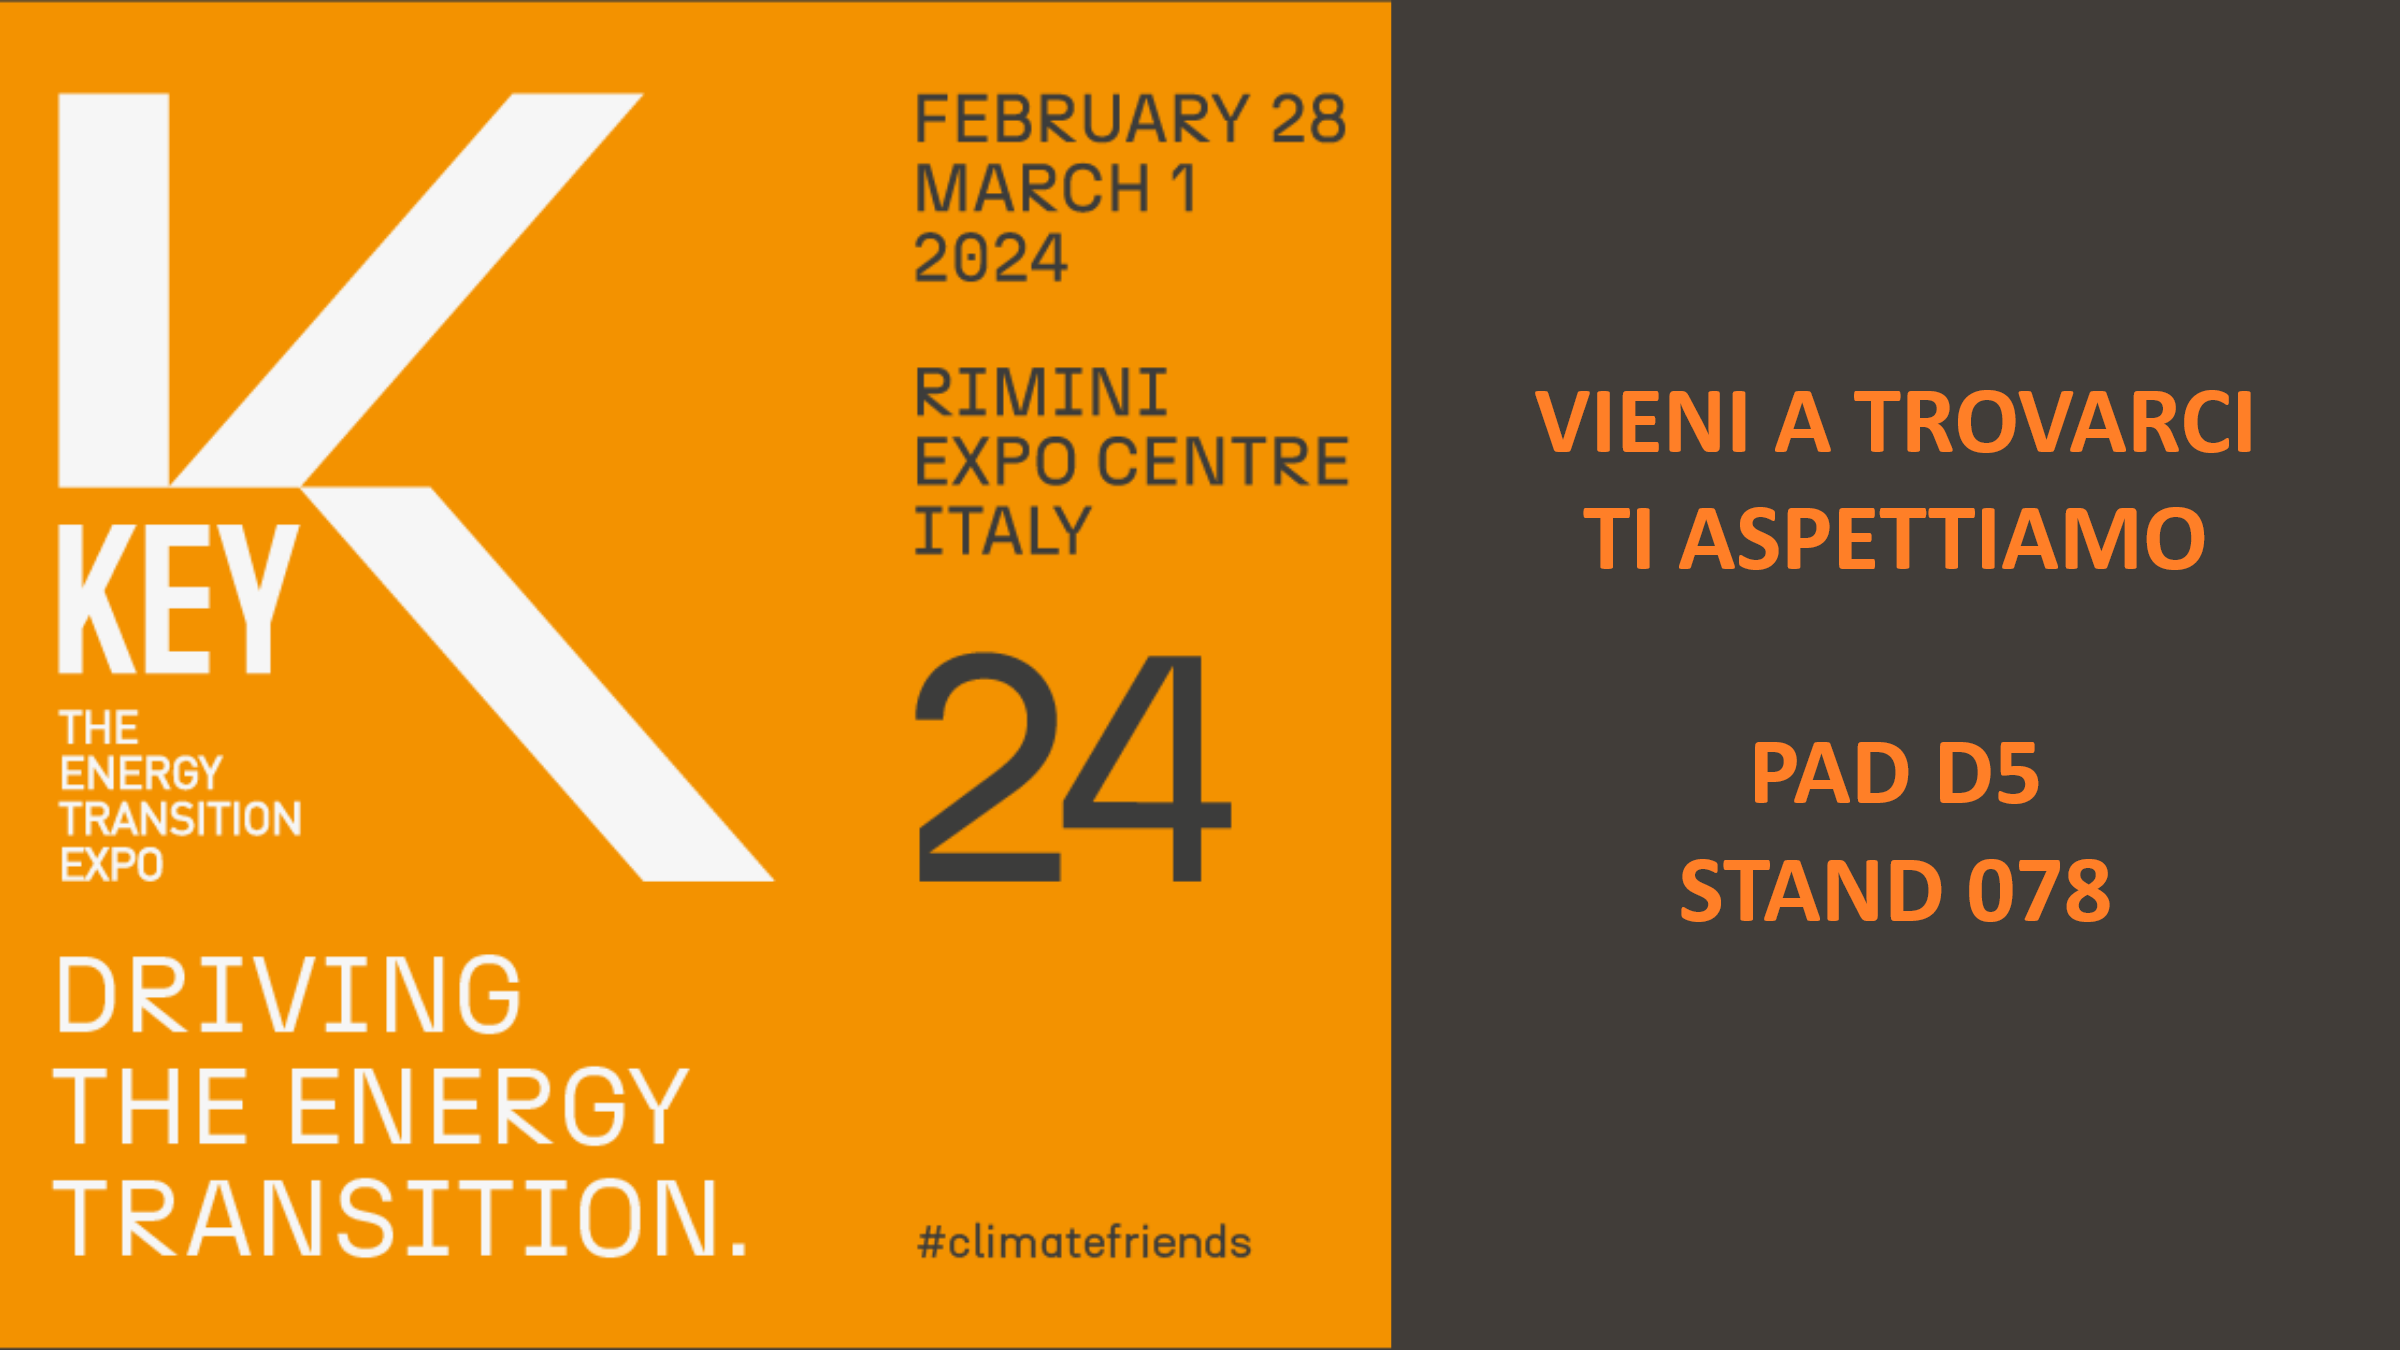 Enerpoint sarà presente a KEY - The Energy Transition Expo